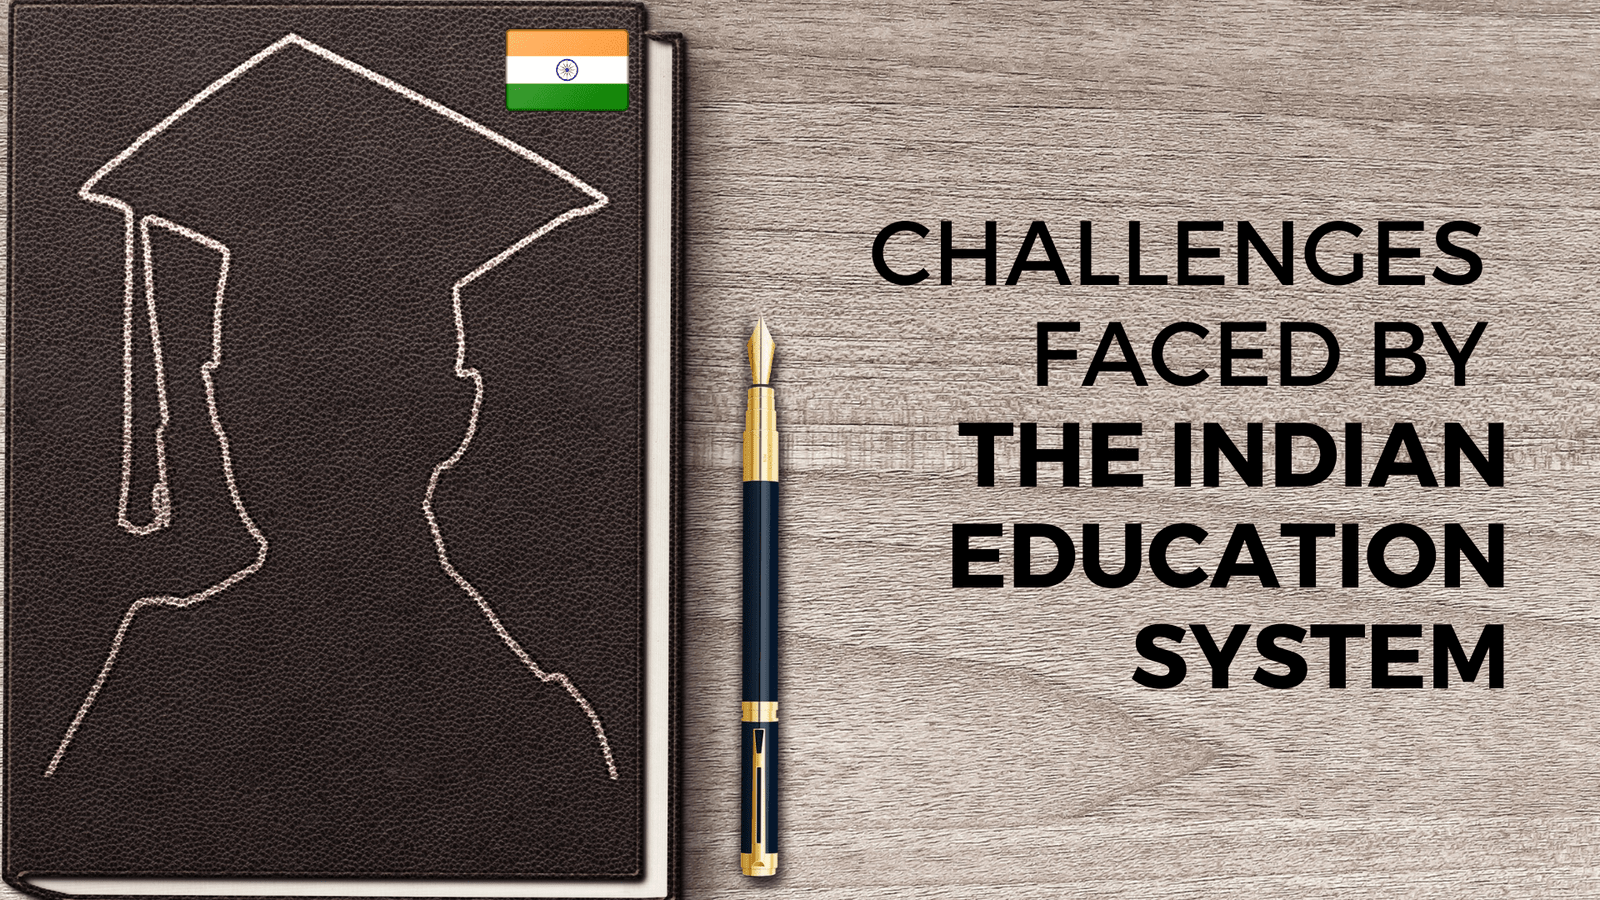 Higher Education in India – Top Challenges Faced